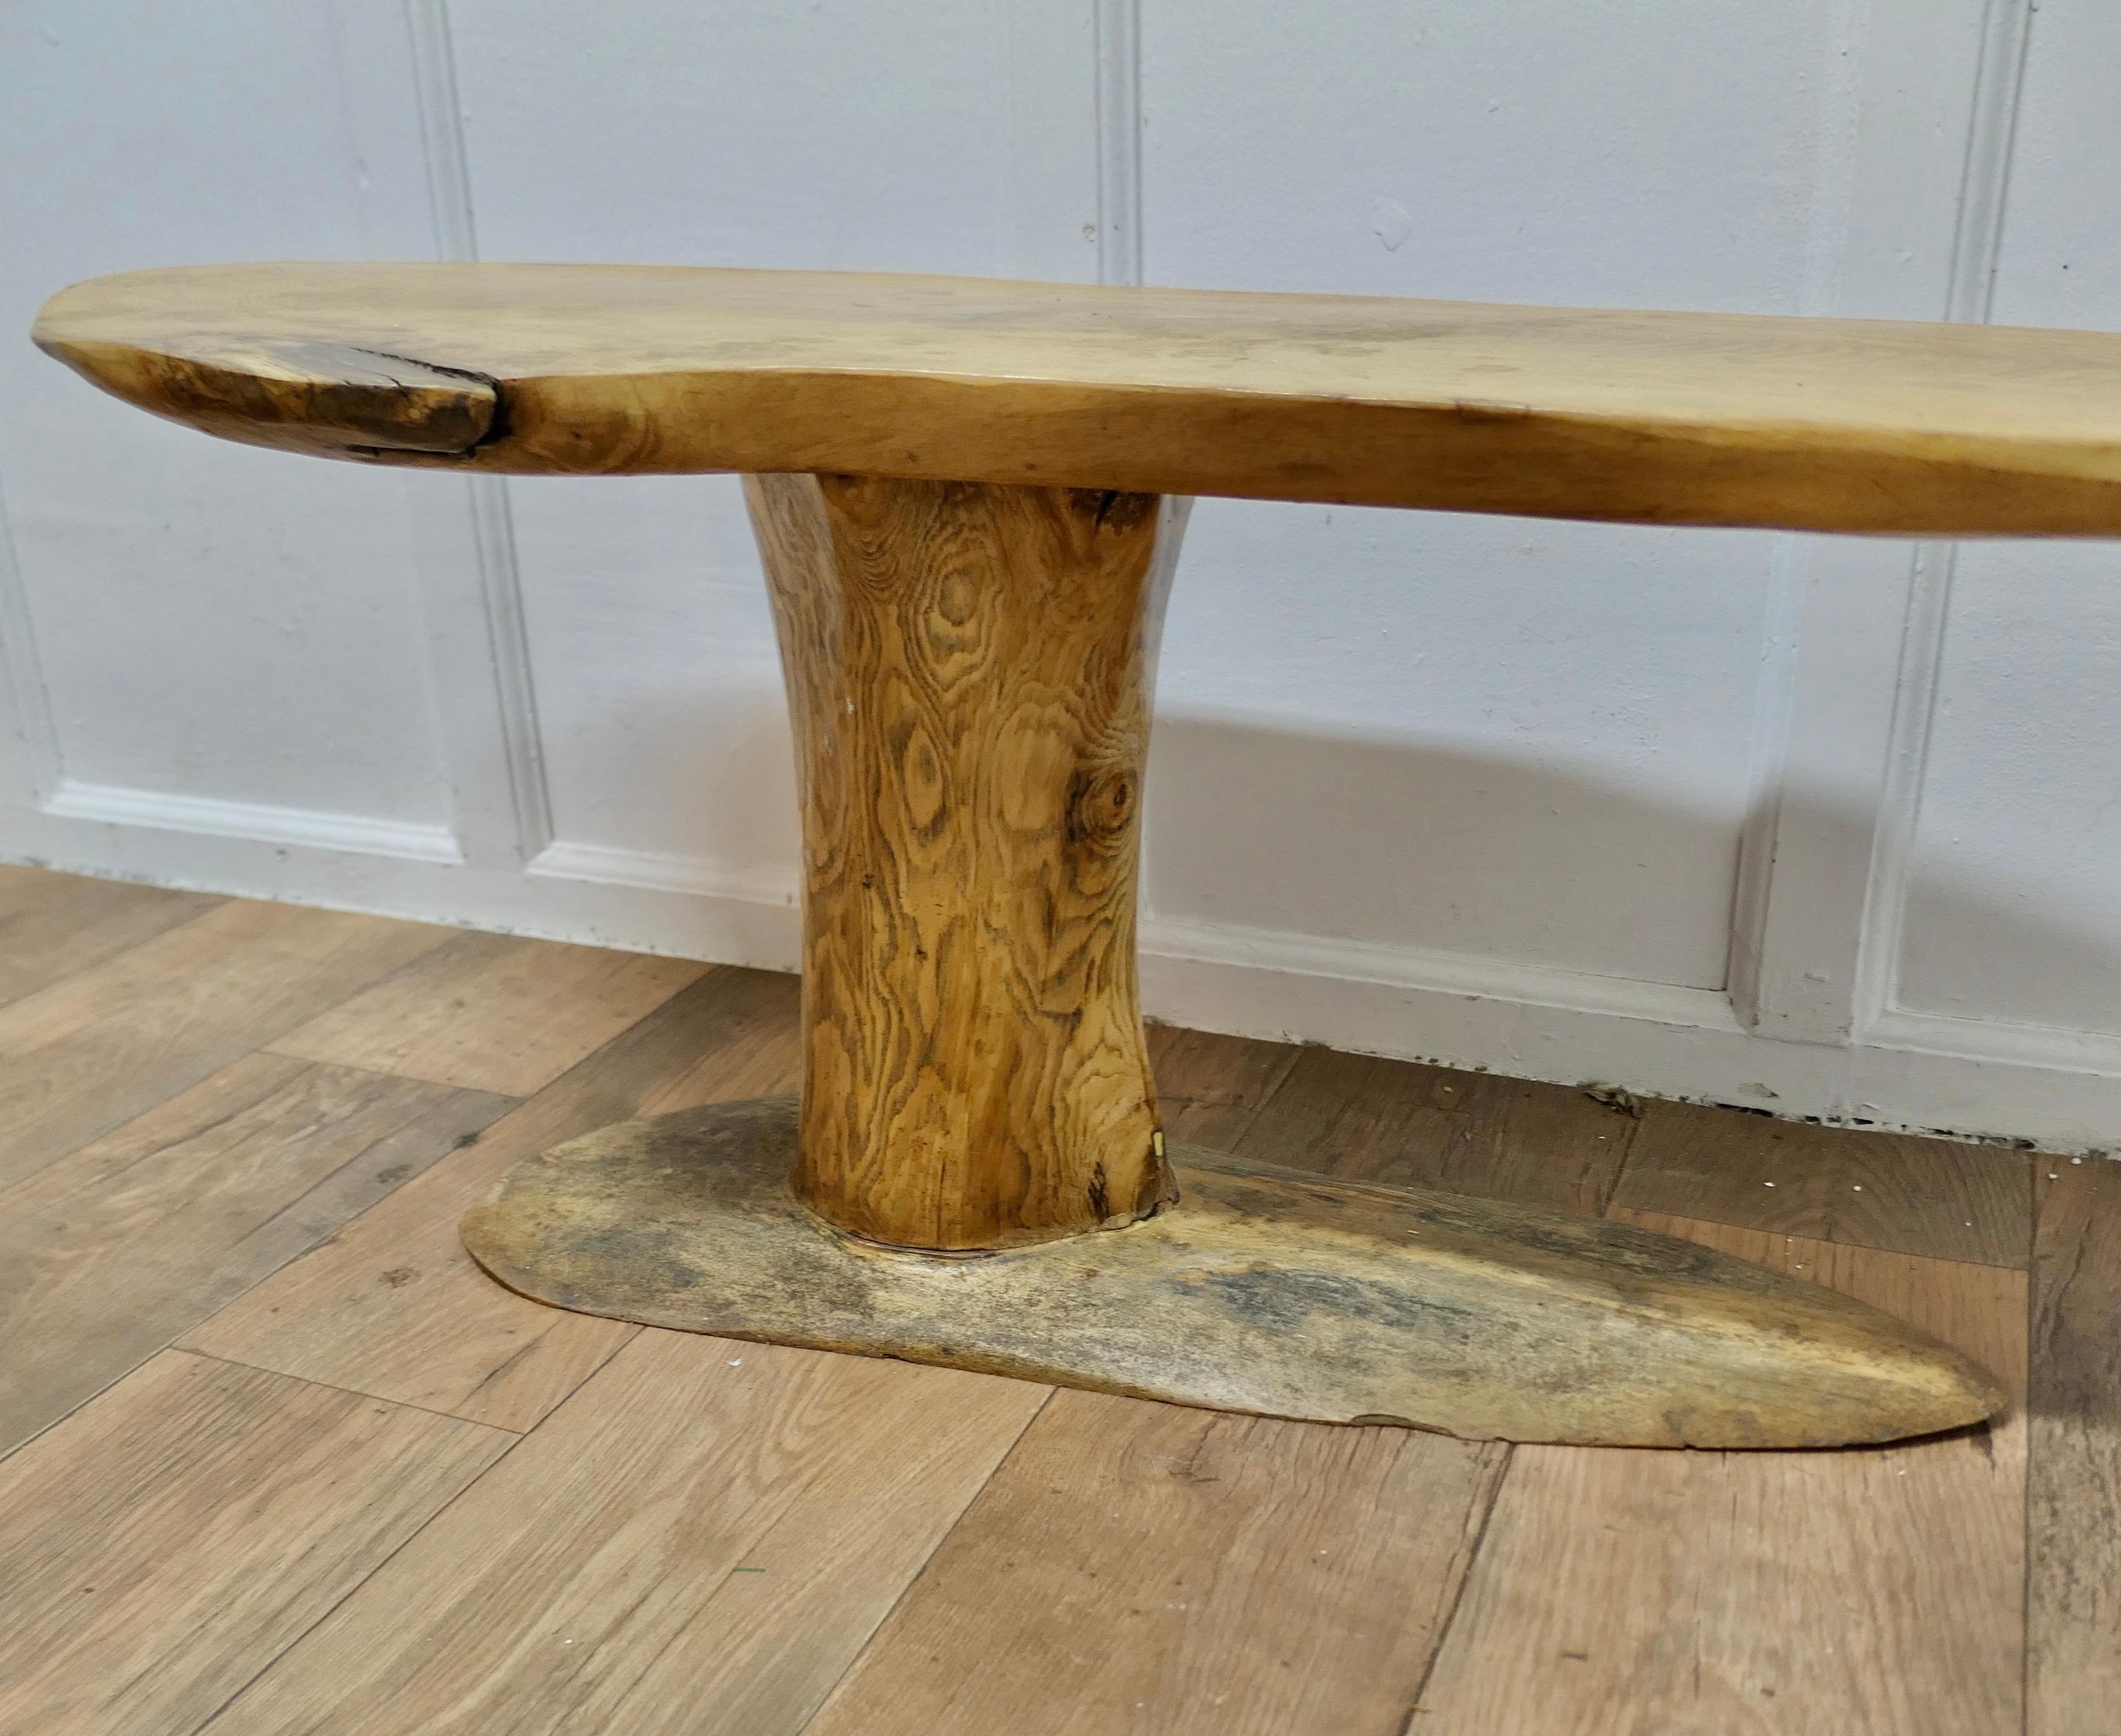 Vintage Handcrafted Freeform Live Edge Solid Plank Elm Coffee Table   No other o In Good Condition For Sale In Chillerton, Isle of Wight